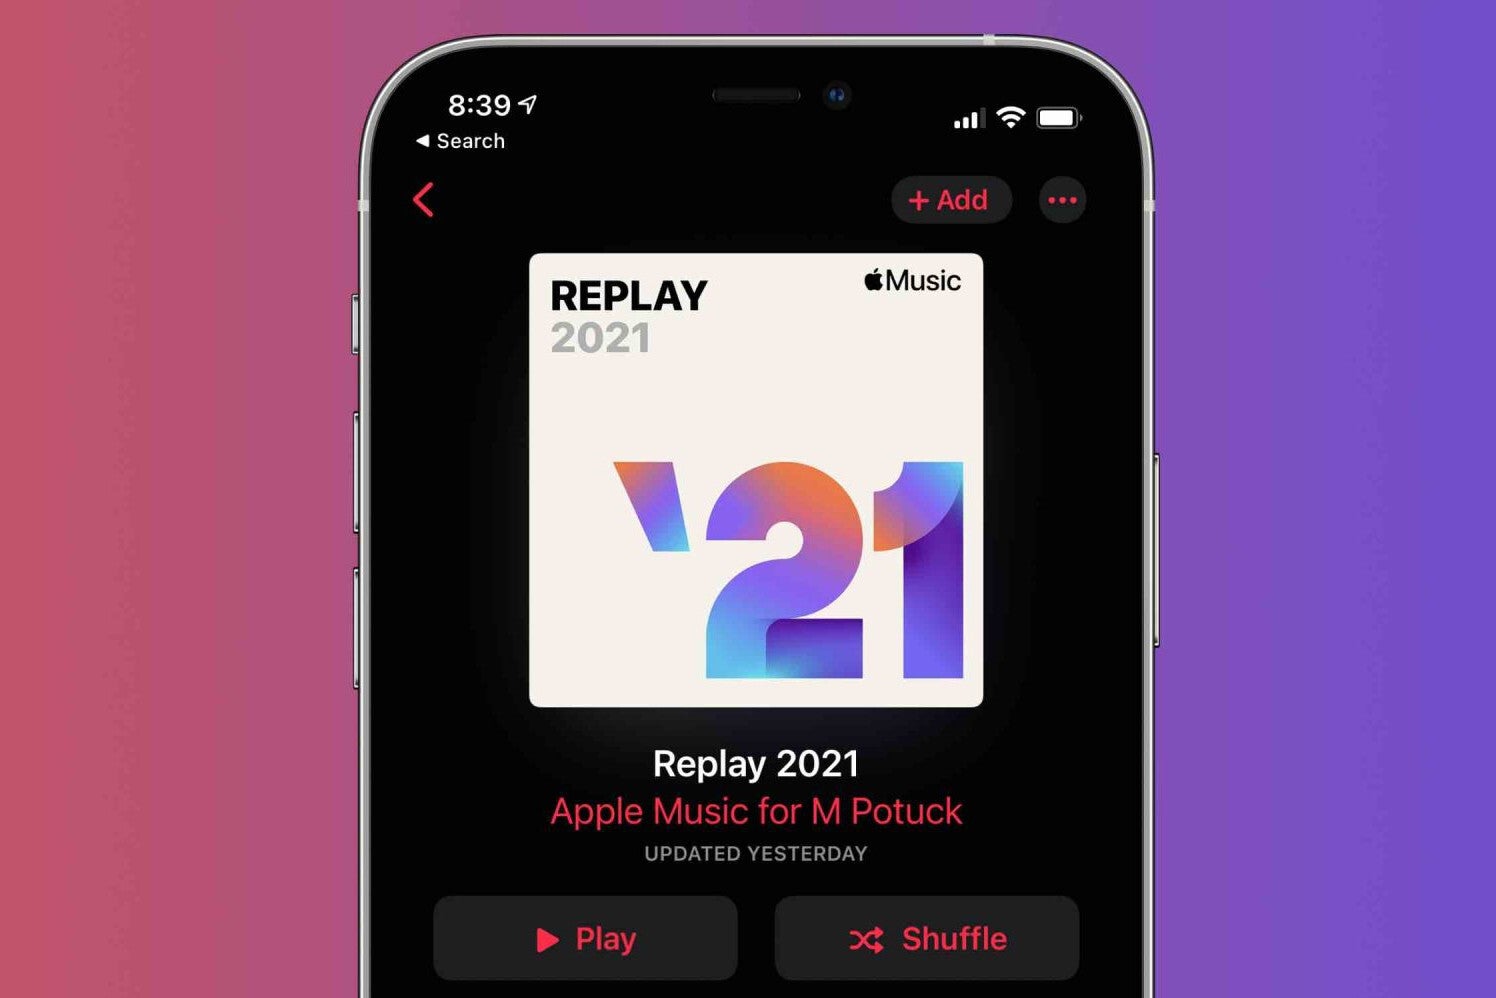 Apple Music Replay 2021 playlist with your favorite songs for 2021 is now available